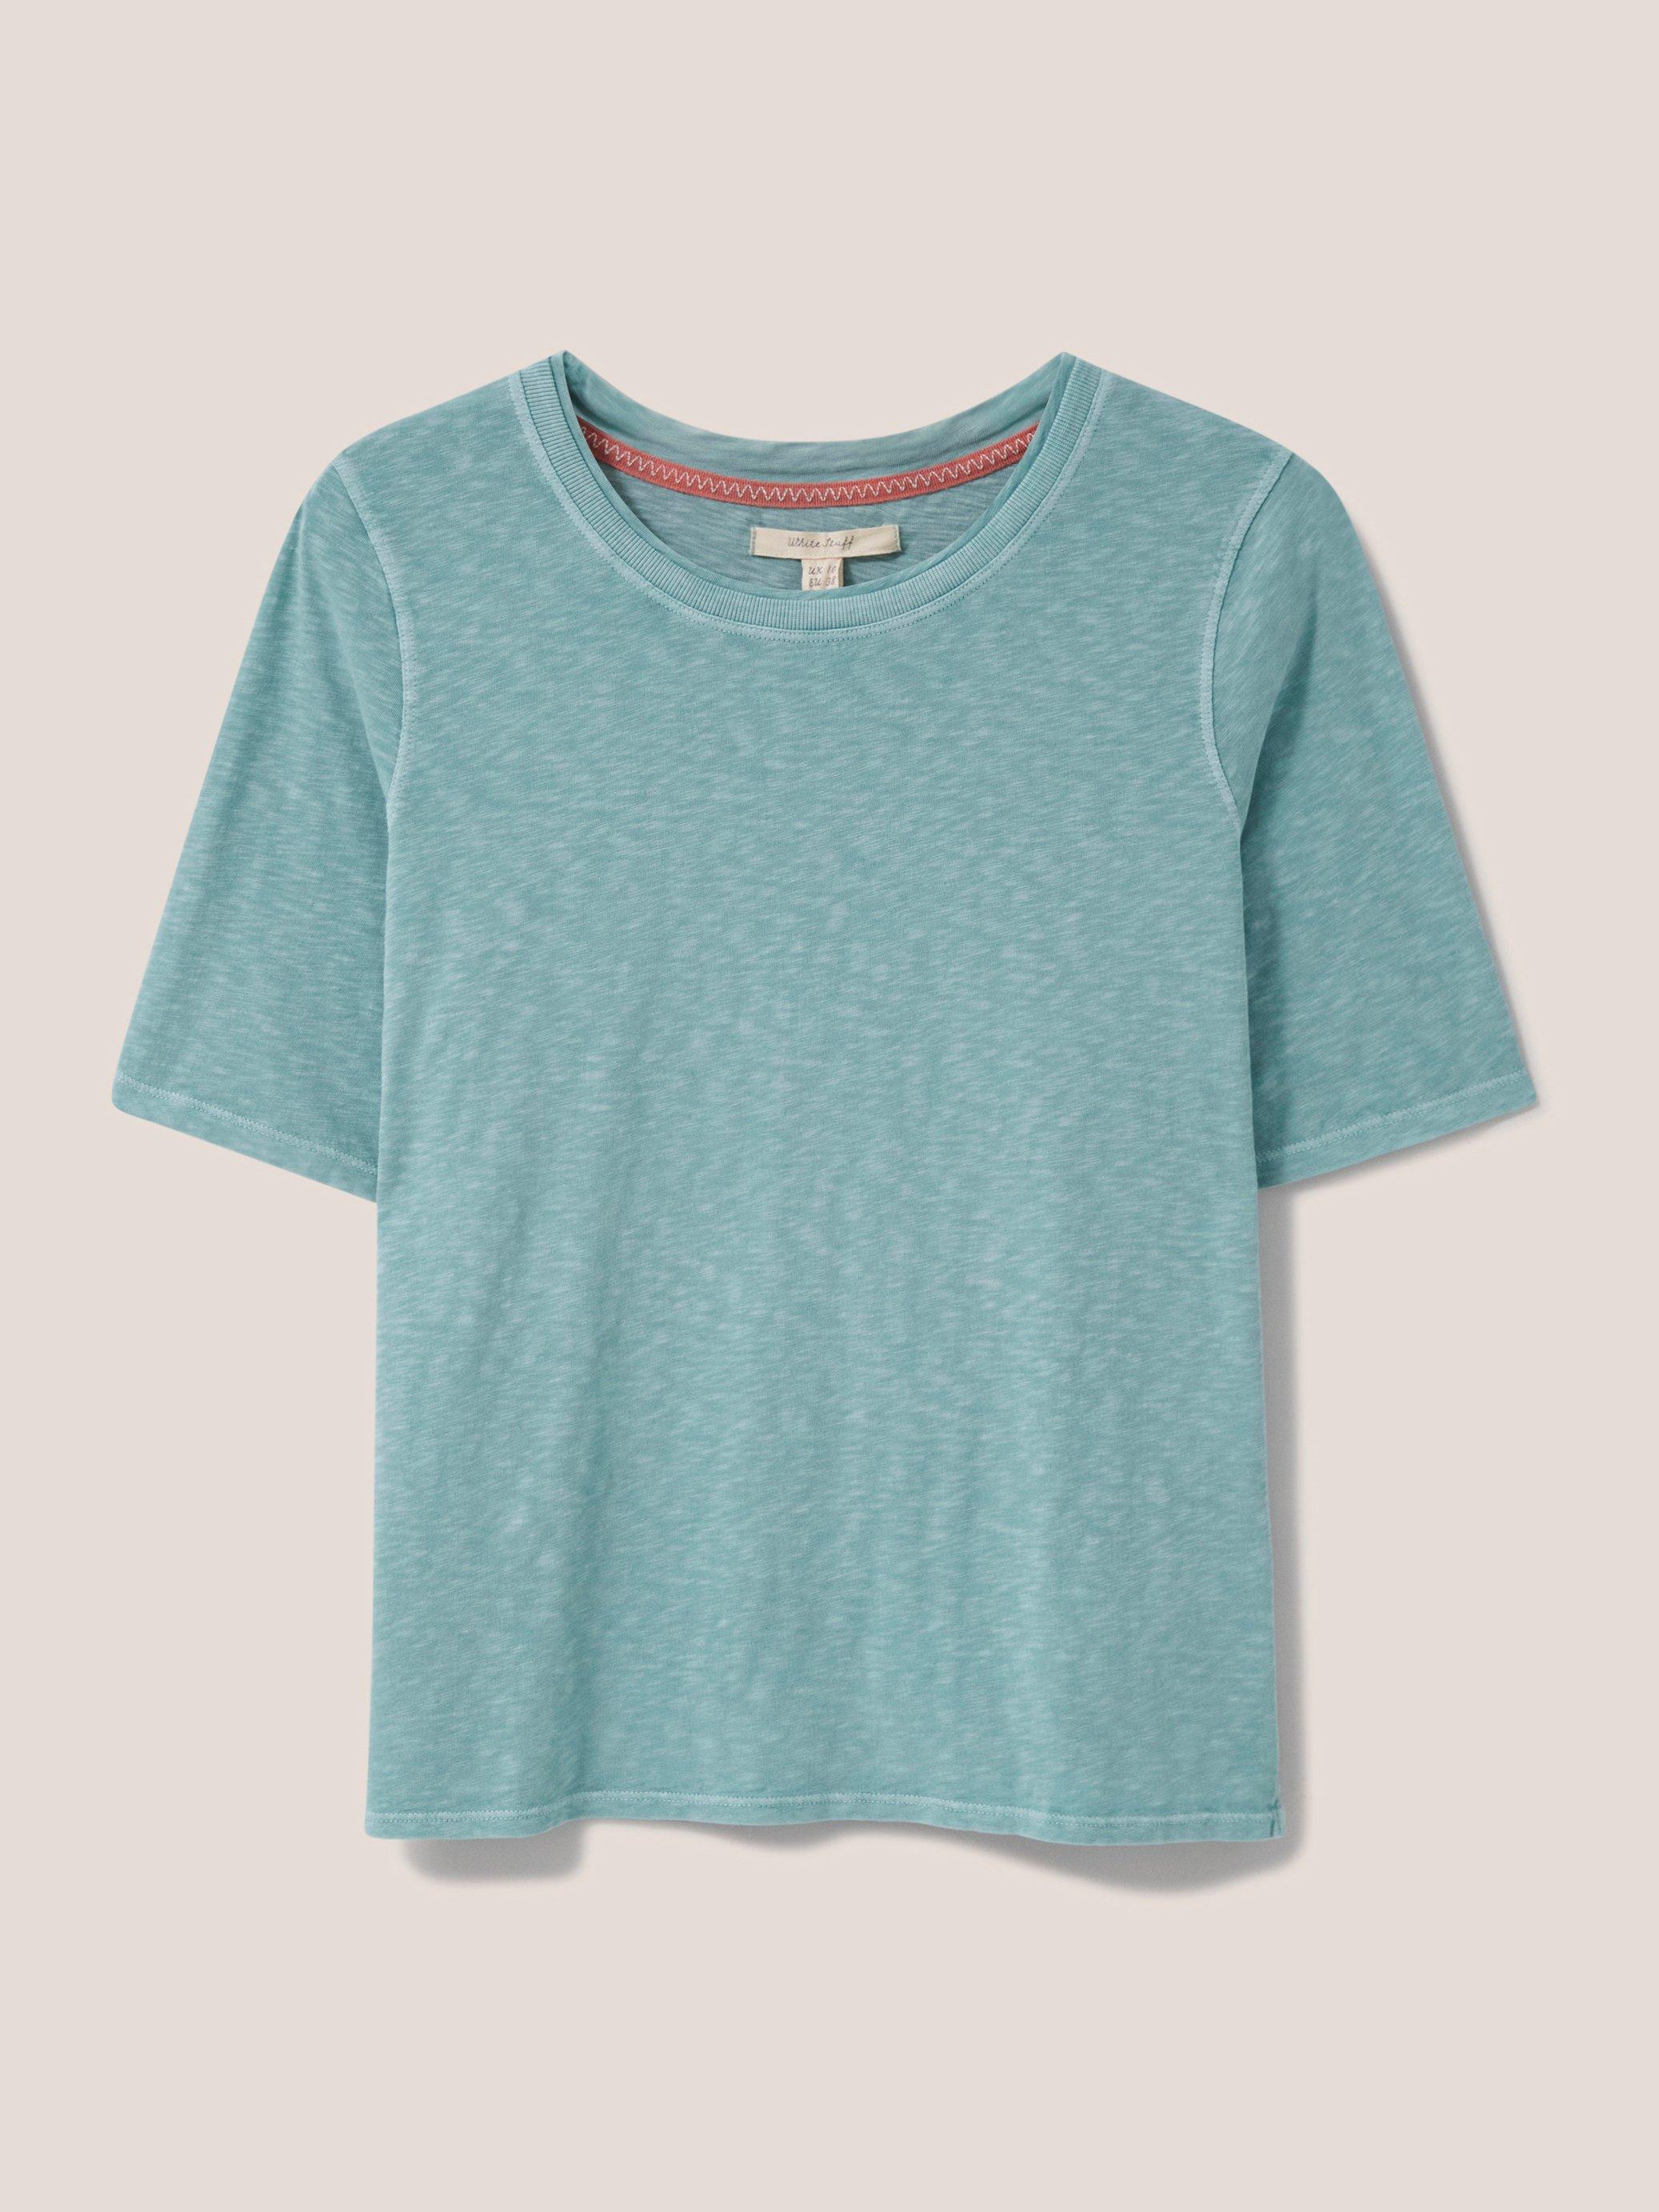 ANNABEL TEE in MID TEAL | White Stuff